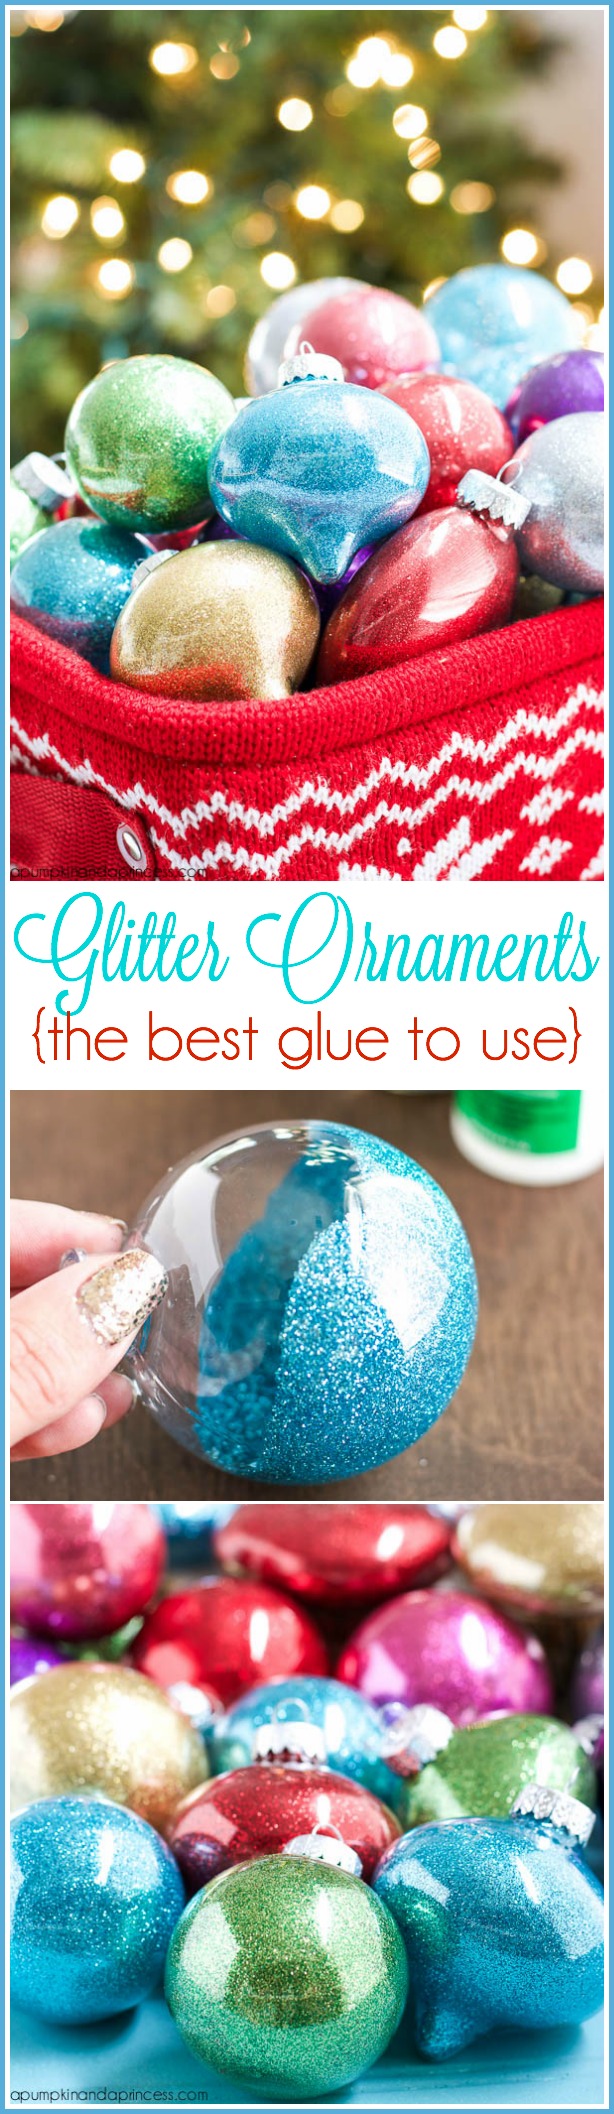 How To Glitter Ornaments